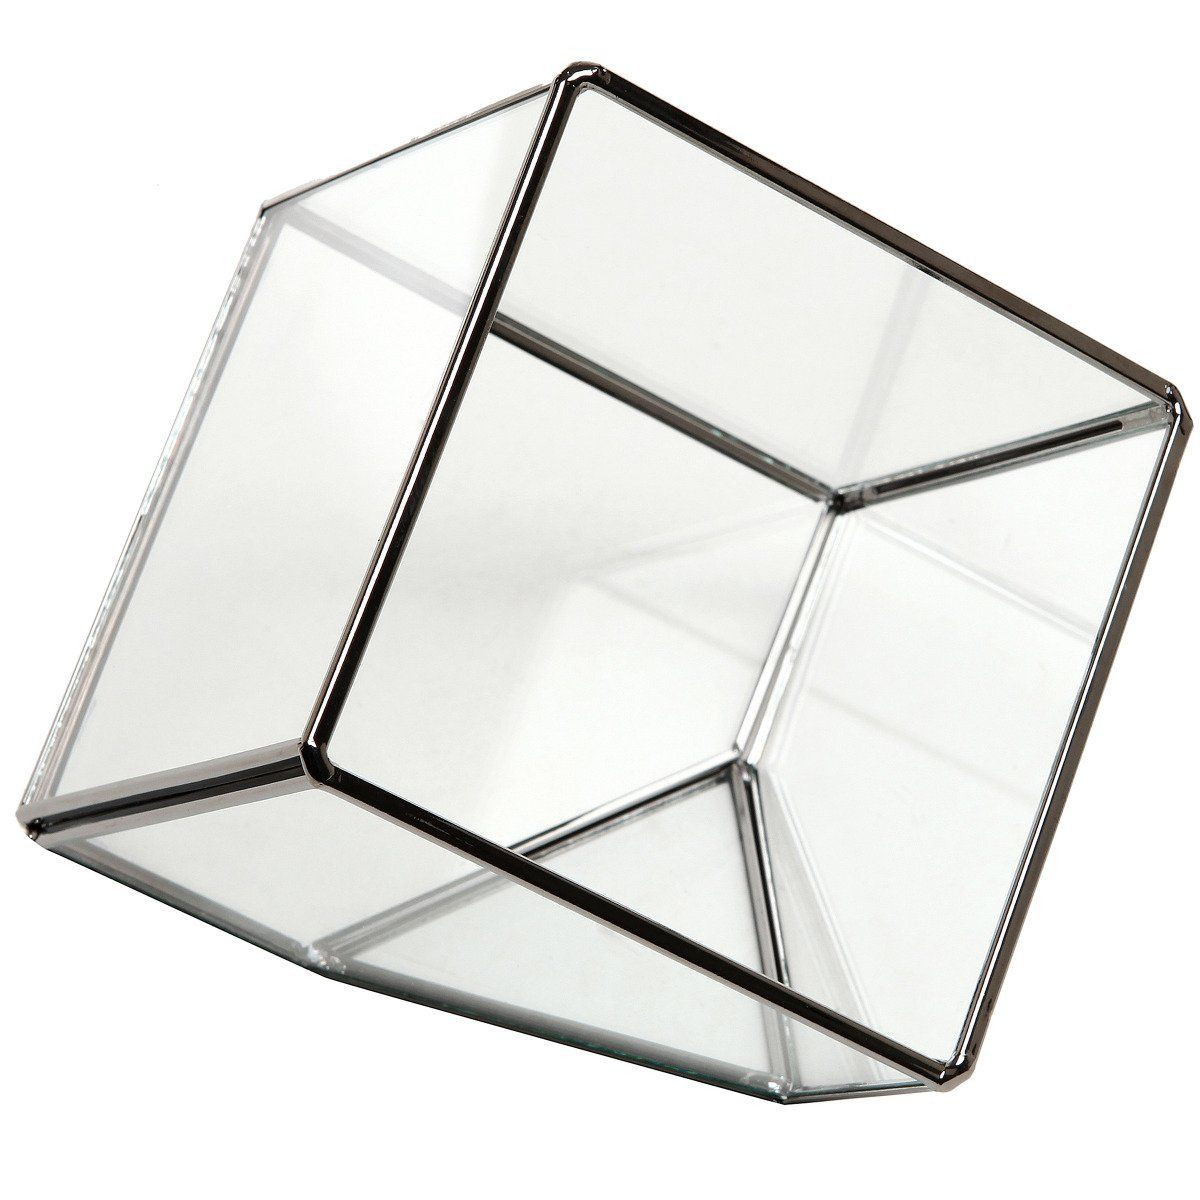 21 Lovely Clear Cube Vase 2024 free download clear cube vase of amazon com modern artistic clear glass cube box glass plant with regard to amazon com modern artistic clear glass cube box glass plant terrarium decorative votive